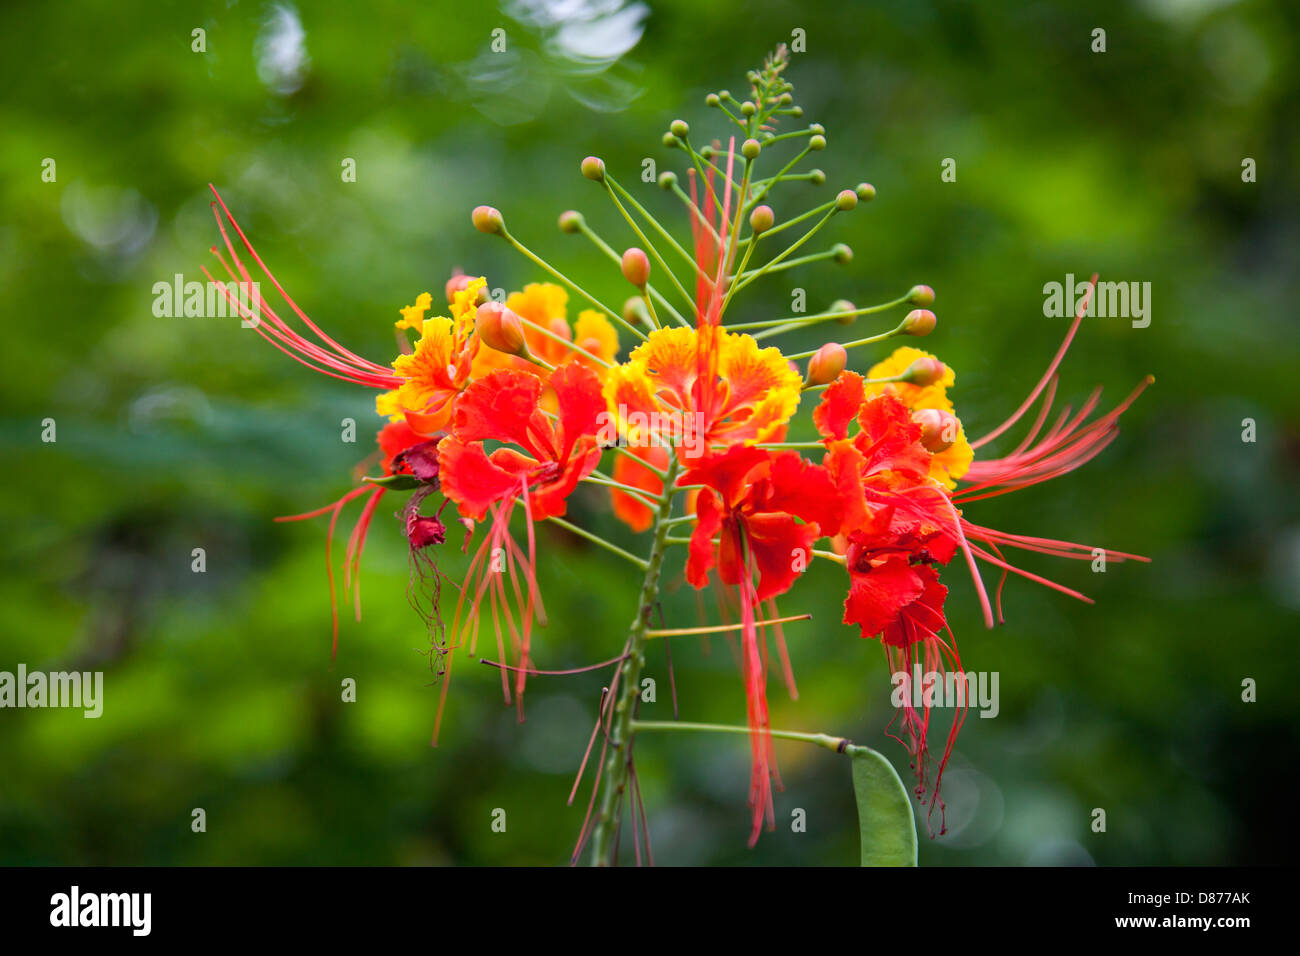 Brazil, View of peacock flowers Stock Photo